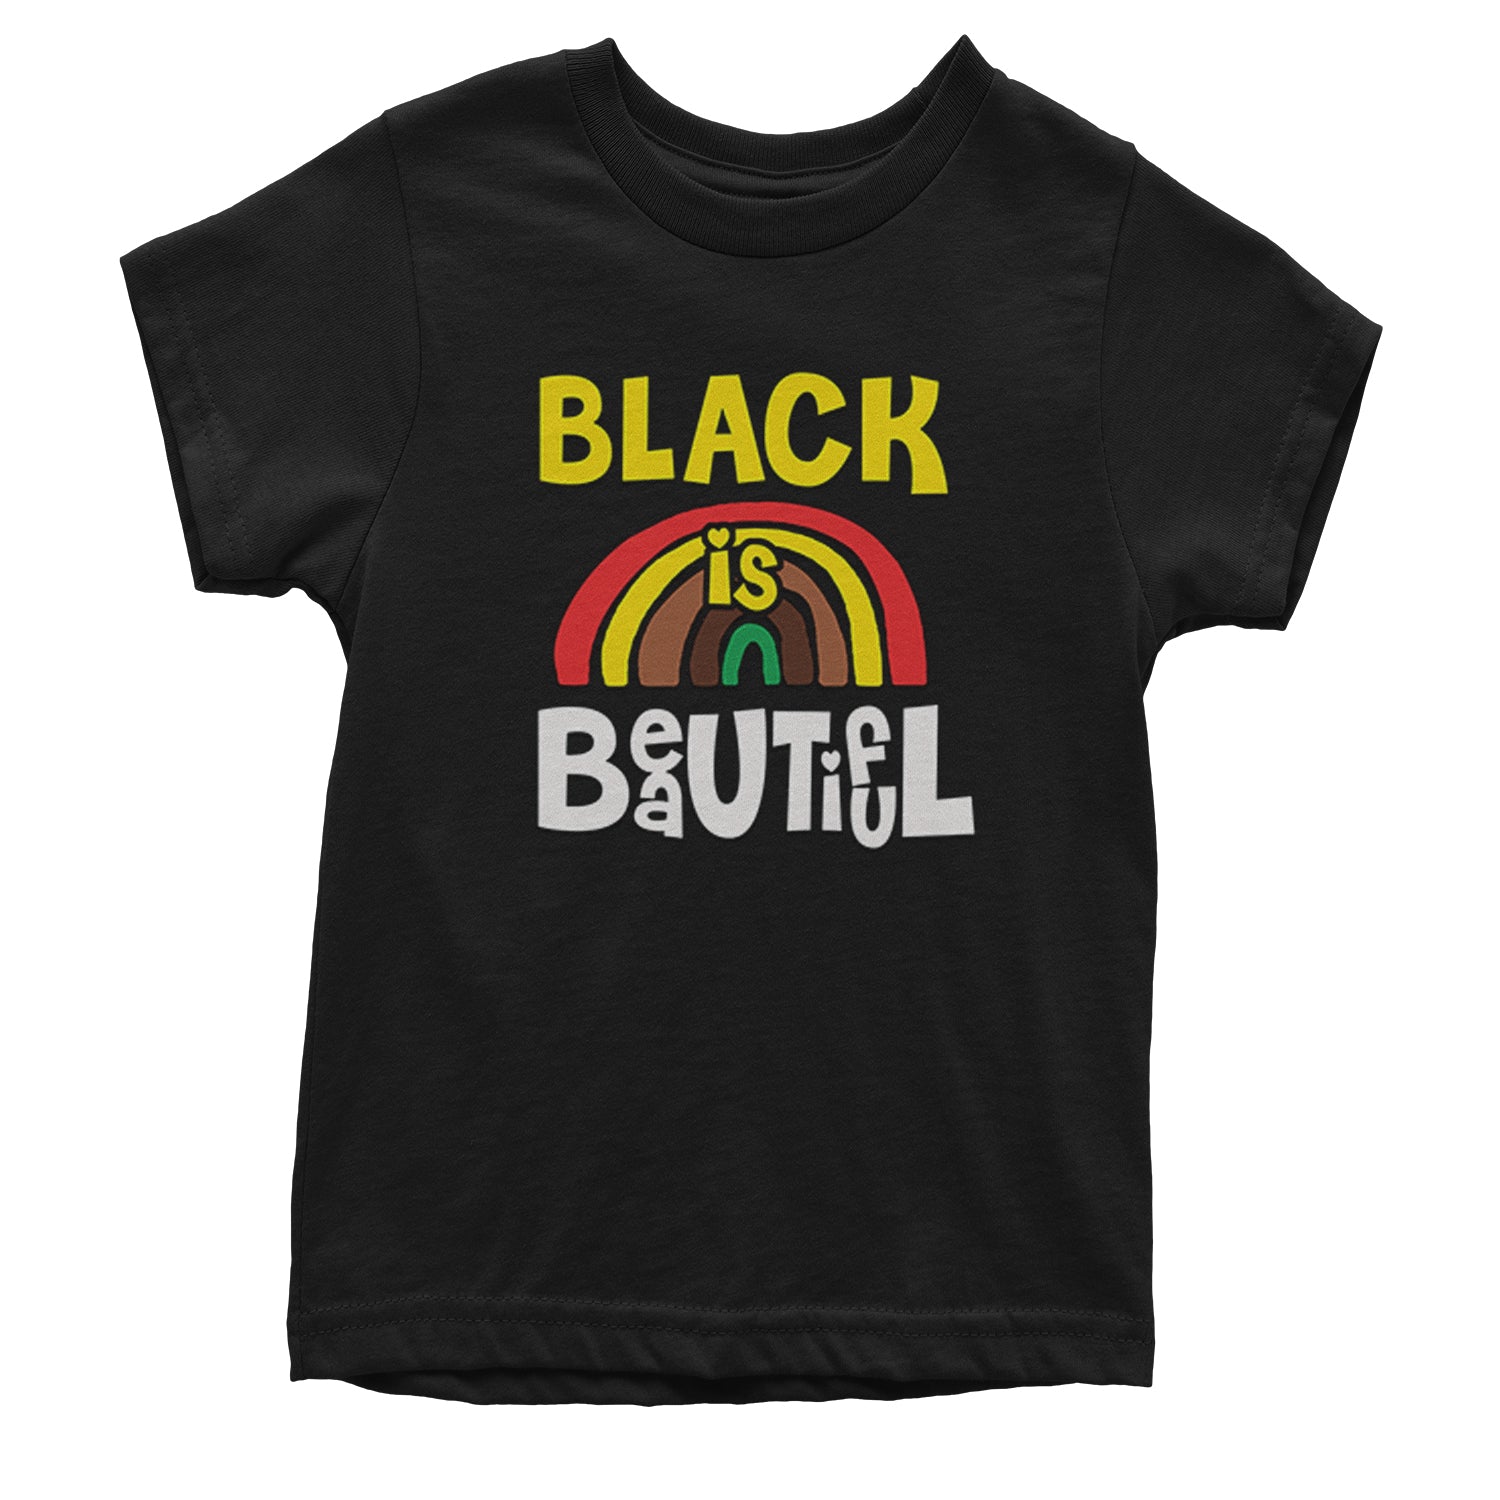 Black Is Beautiful Rainbow Youth T-shirt african, africanamerican, american, black, blackpride, blm, harriet, king, lives, luther, malcolm, march, martin, matter, parks, protest, rosa, tubman, x by Expression Tees